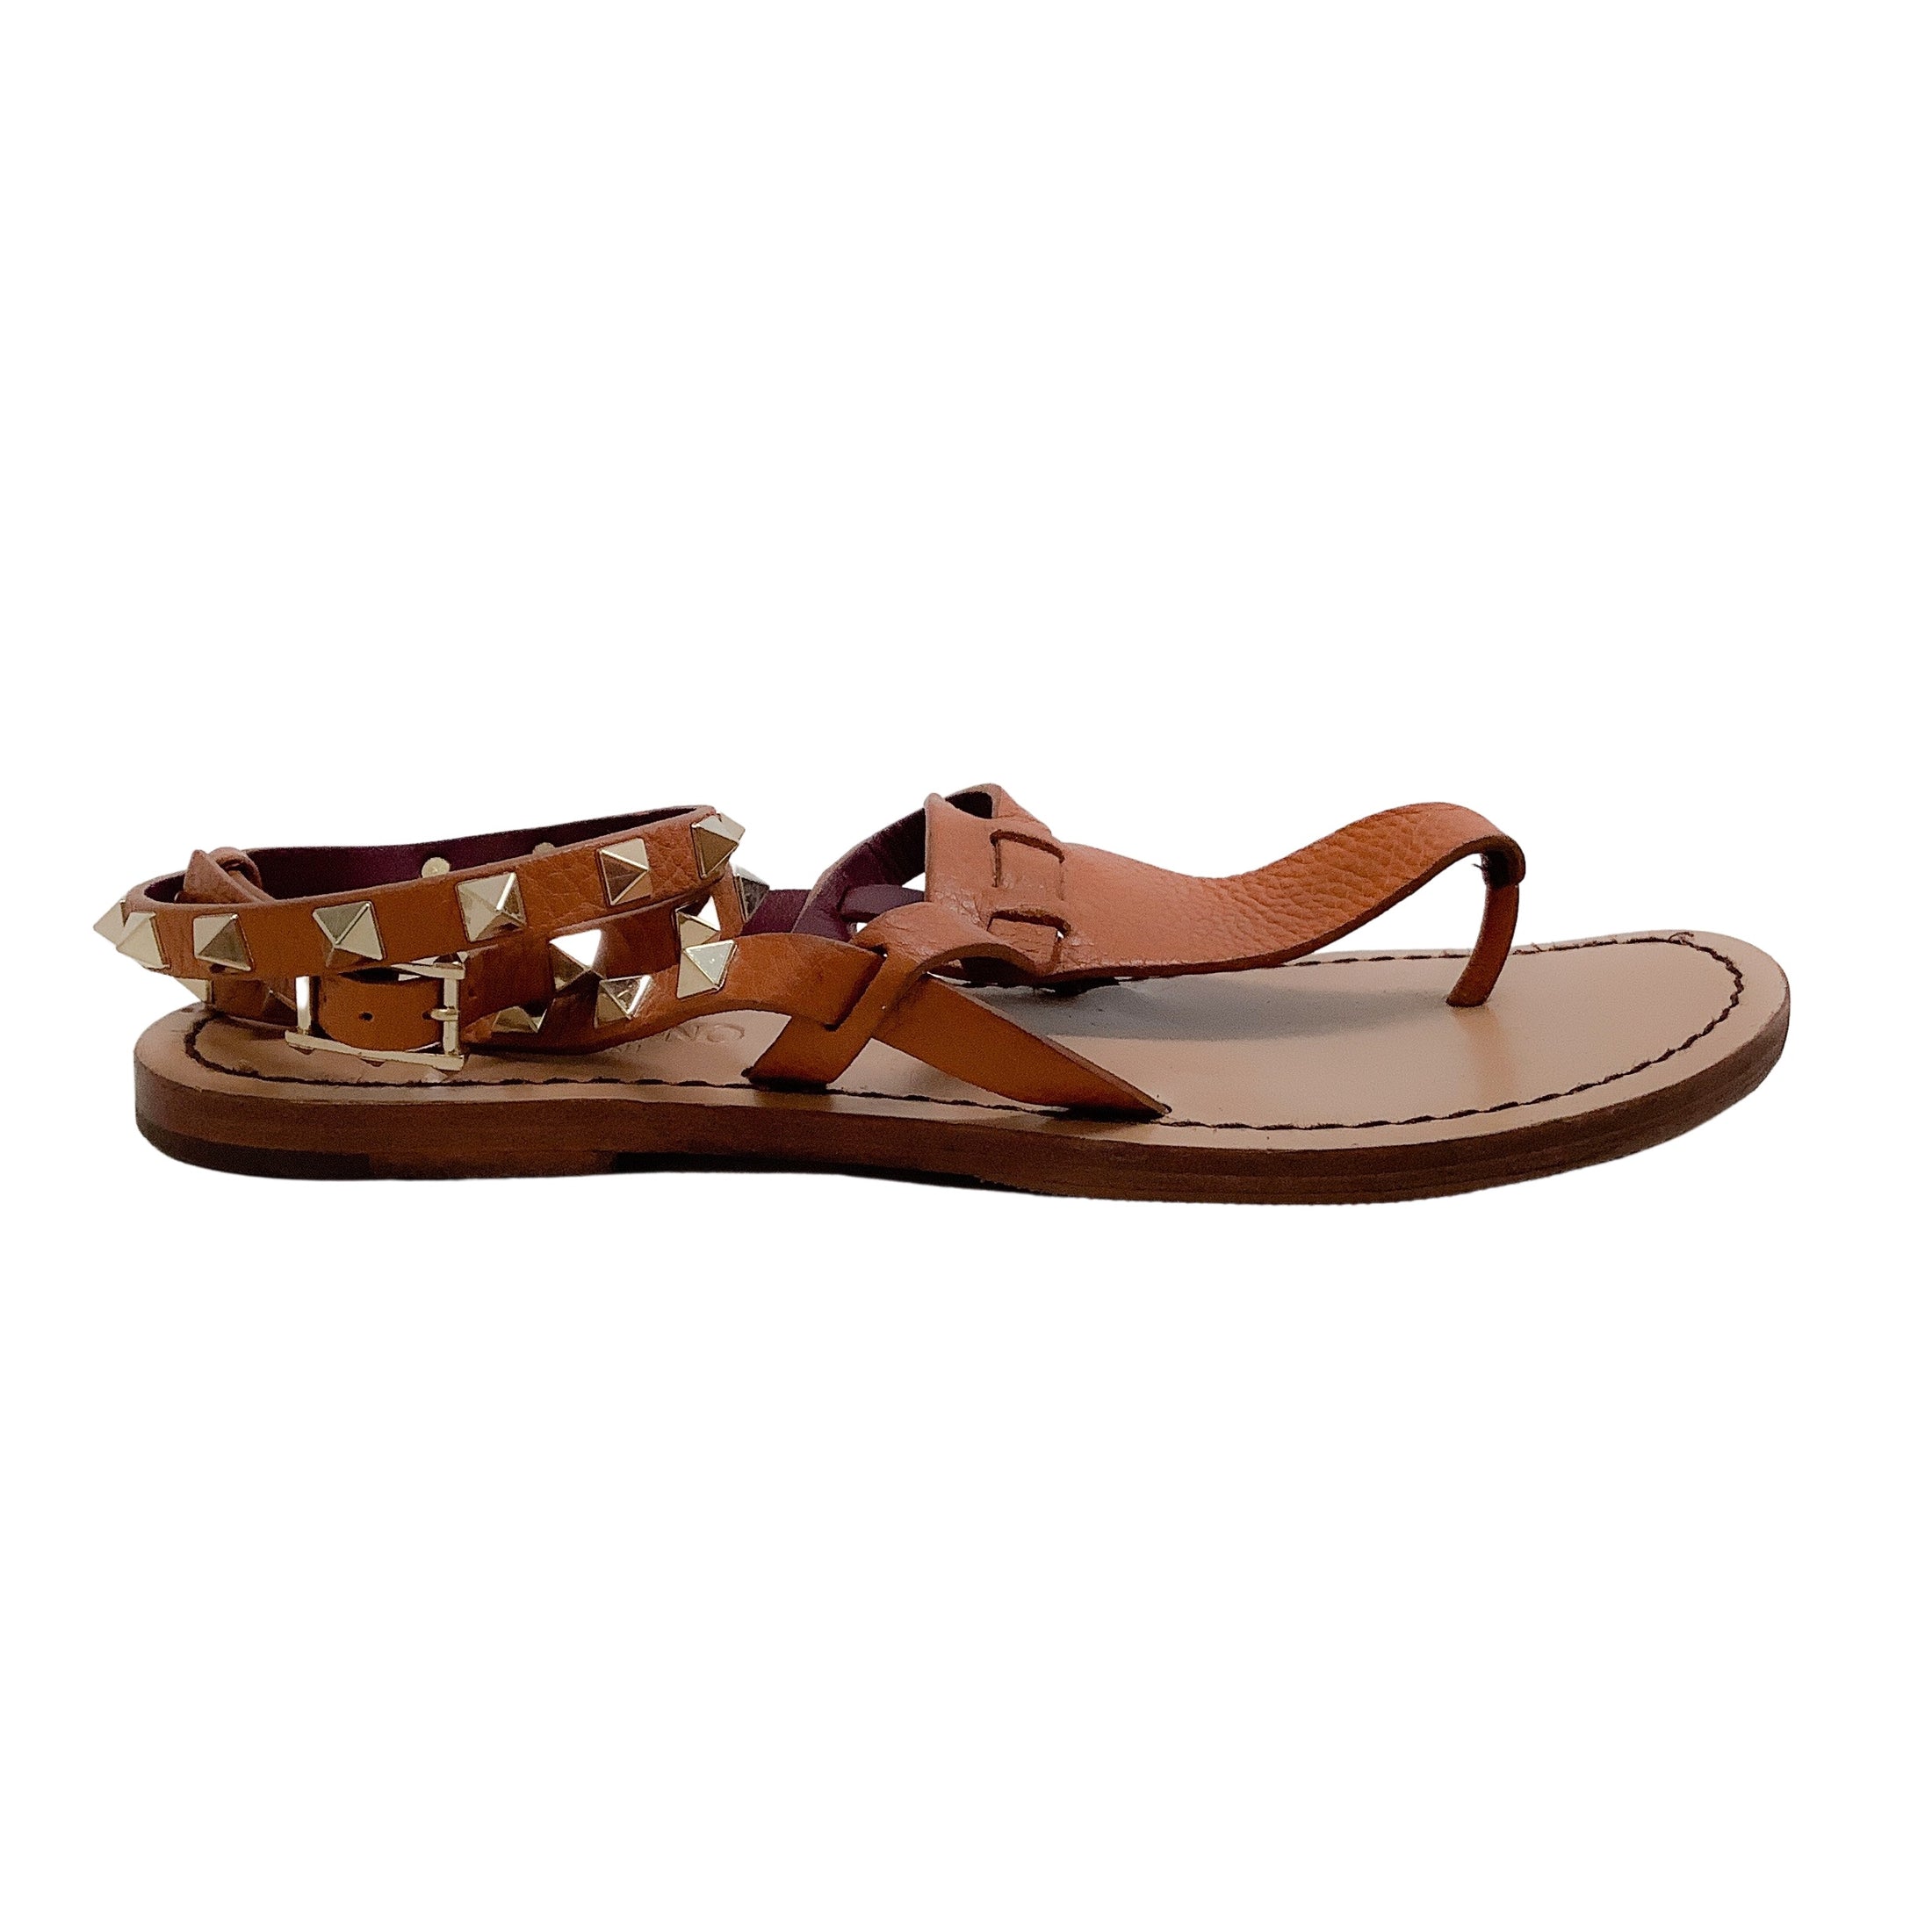 Valentino Tan Leather Rockstud Flat Sandal with Ankle Strap